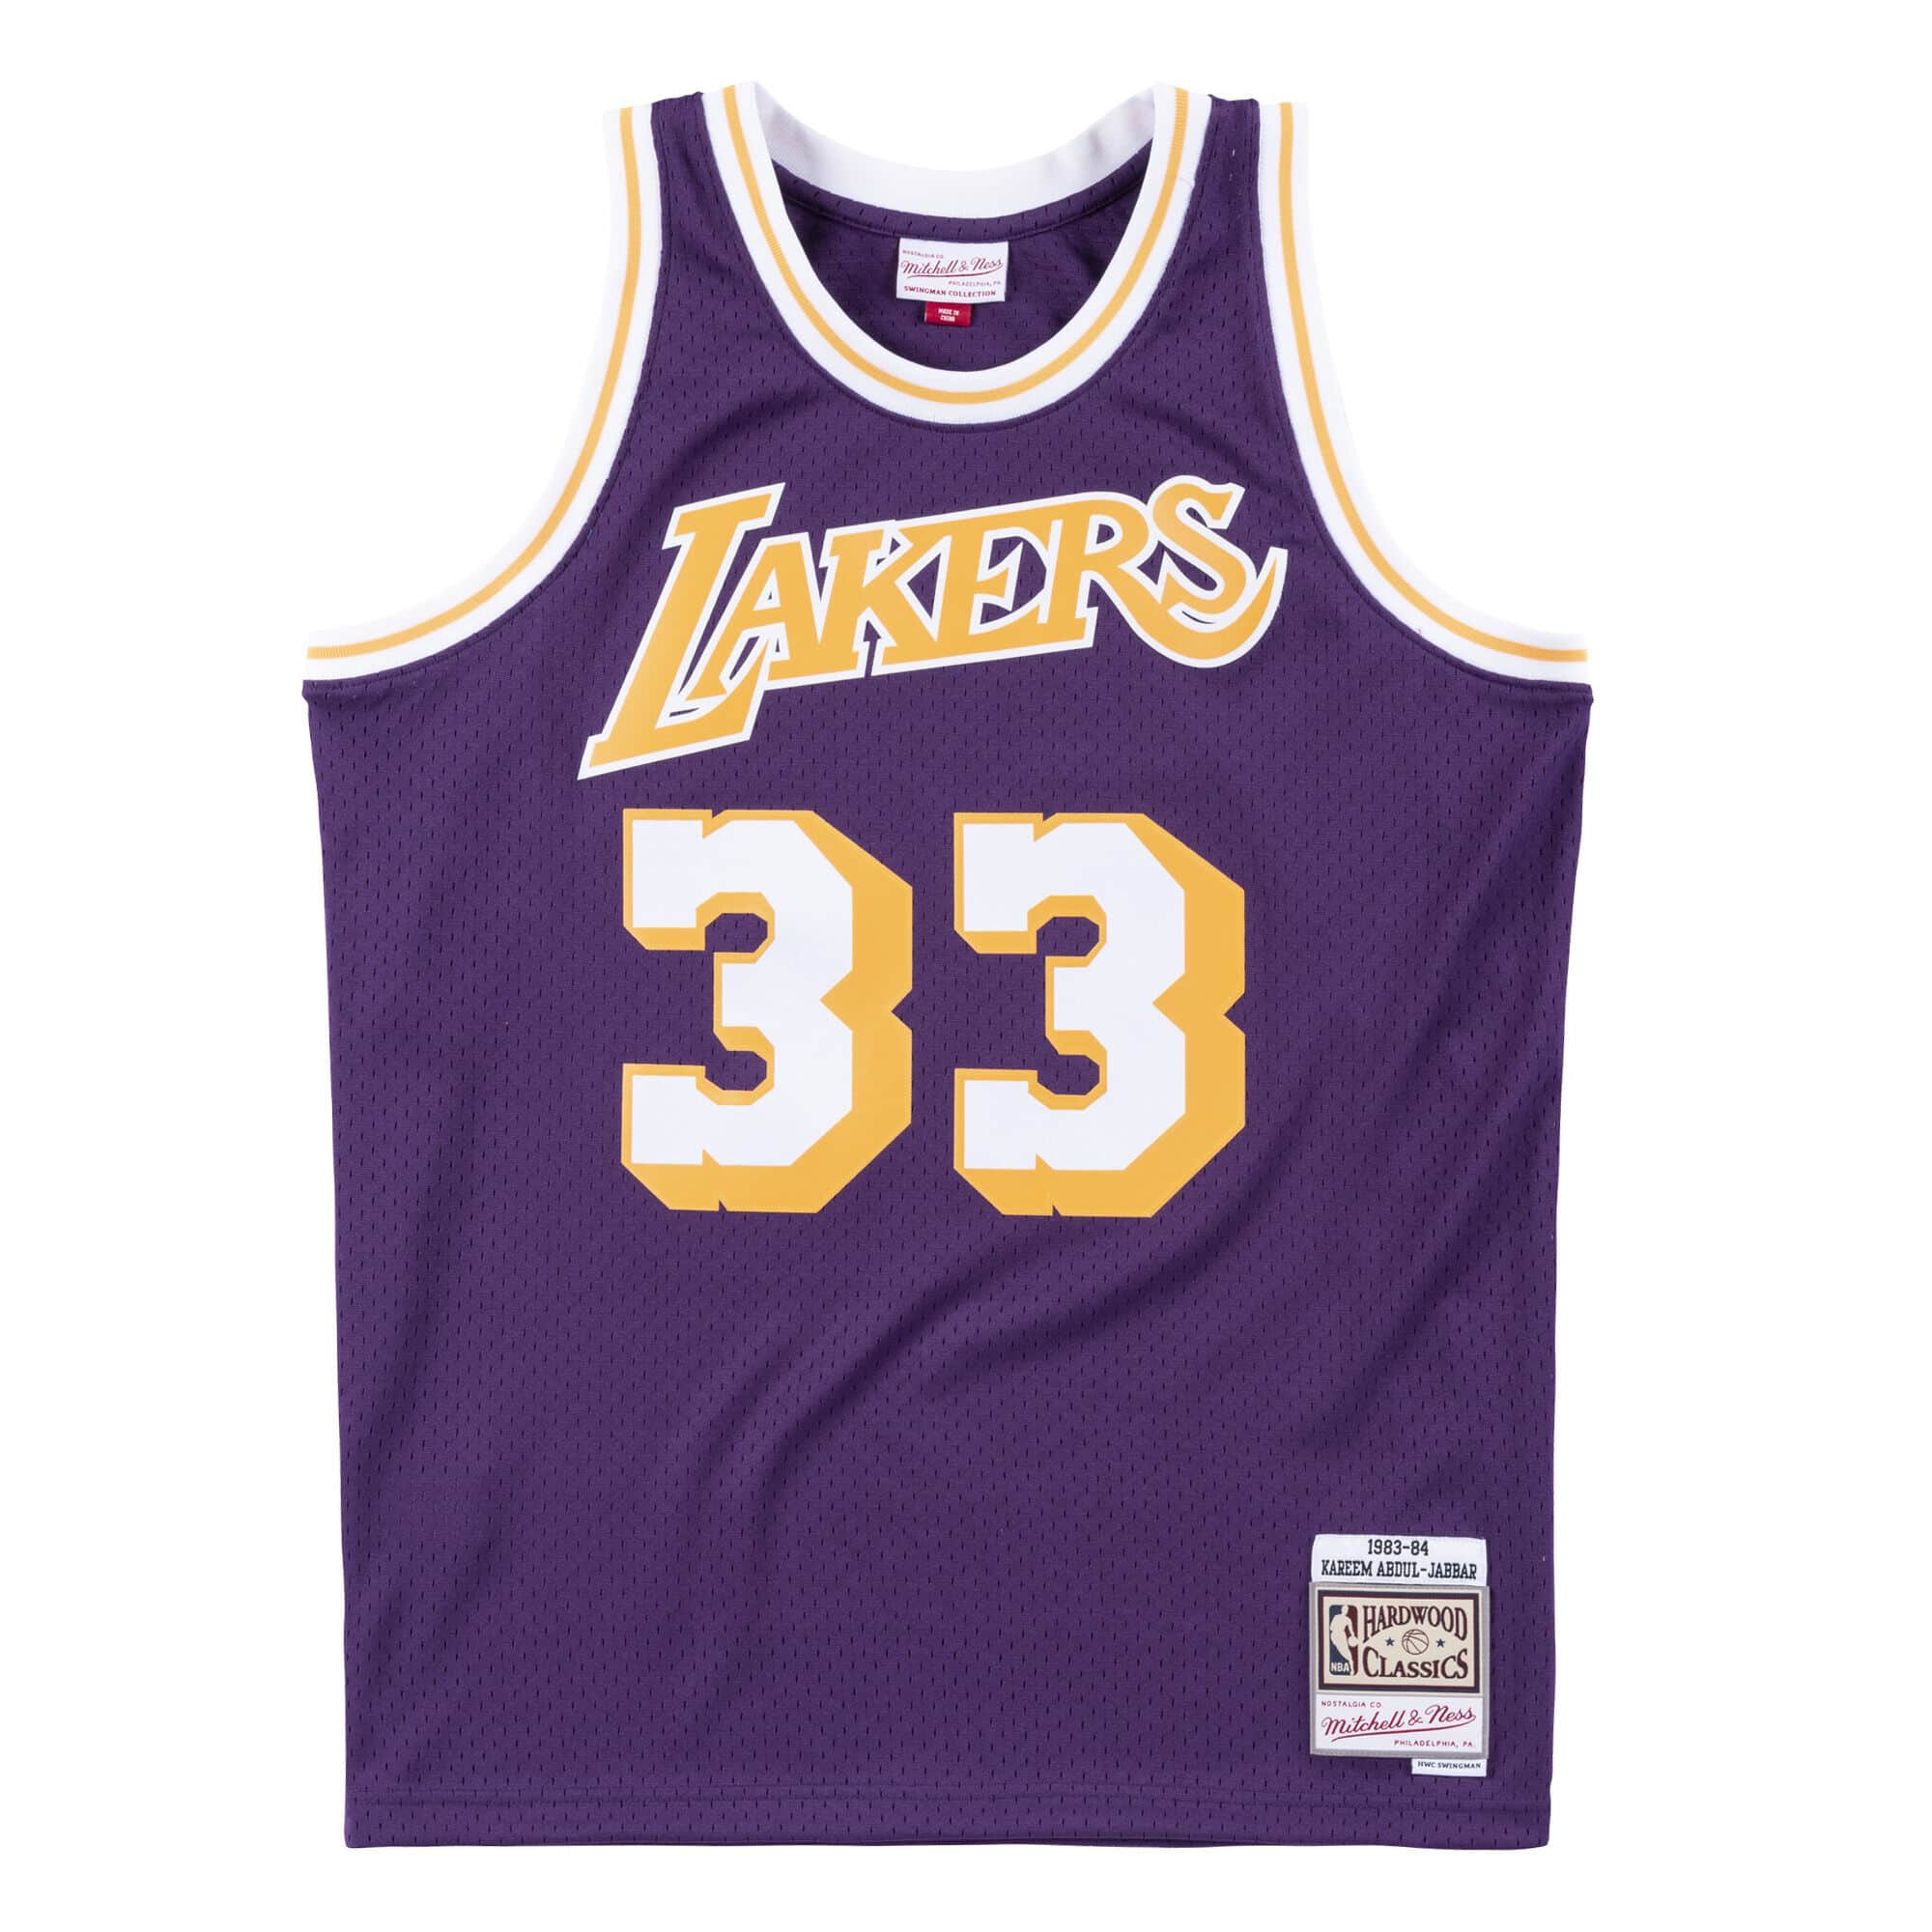 Mitchell & Ness  Authentic and Throwback-Inspired Jerseys, Shorts,  Apparel, and Hats Mitchell & Ness Nostalgia Co.